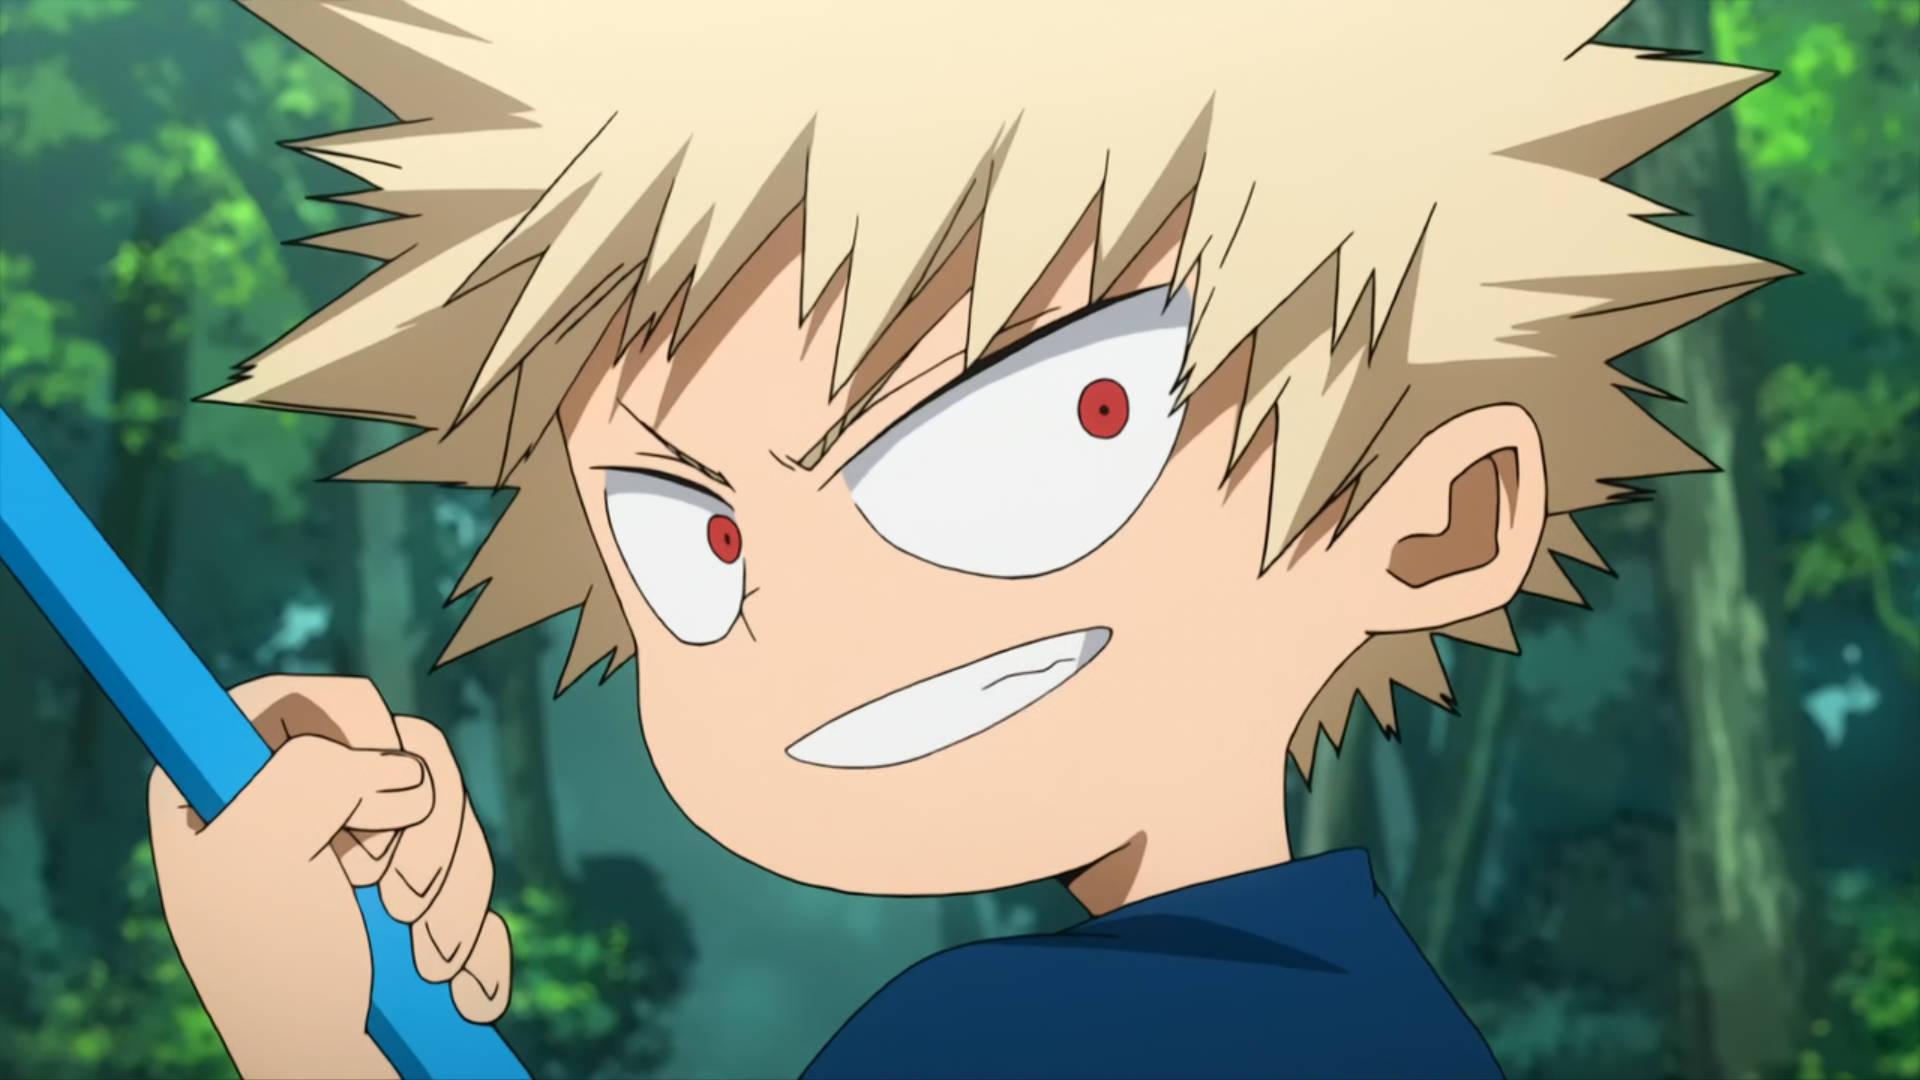 Cute Bakugou, Looking To Take Over The World! Background